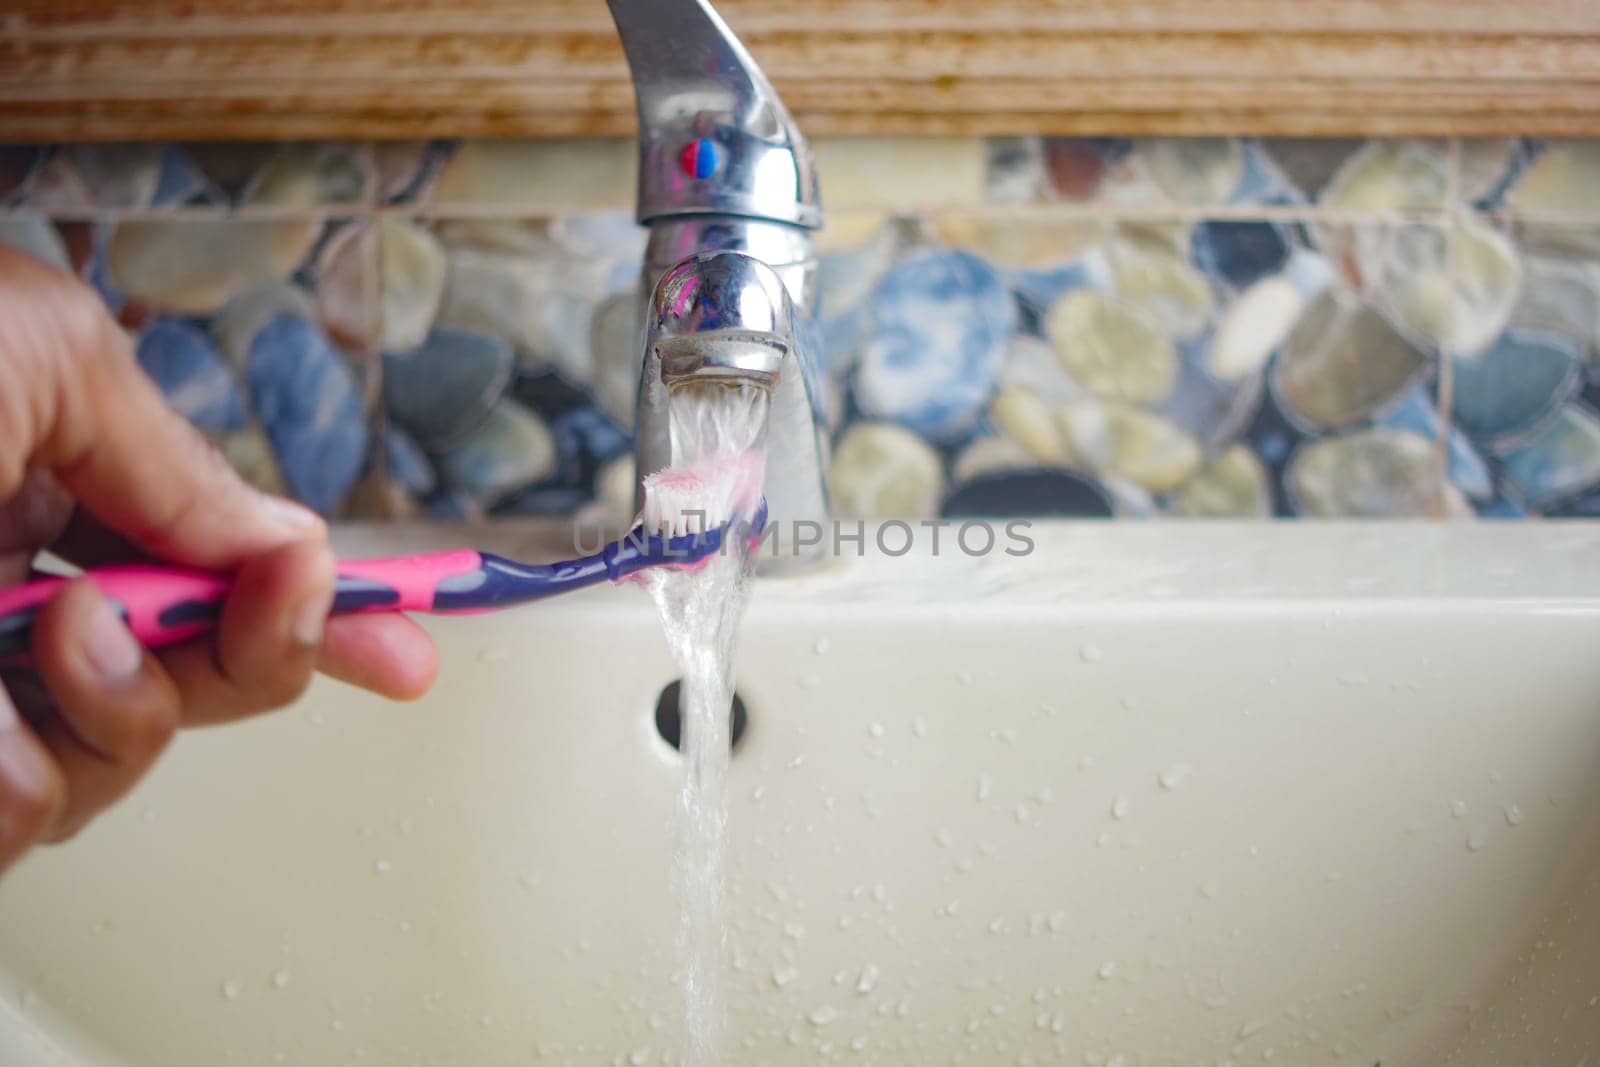 slow motion of holding toothbrush under flowing water in bathroom, closeup